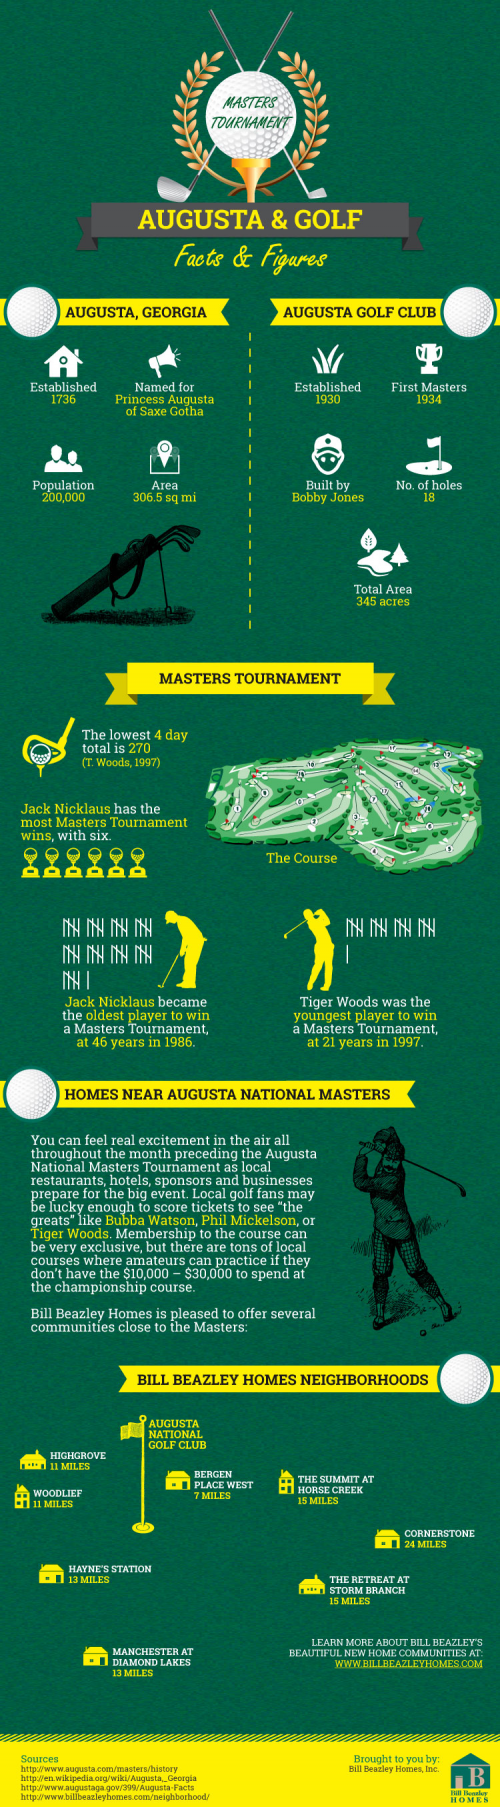 Homes Near the Augusta National Masters'